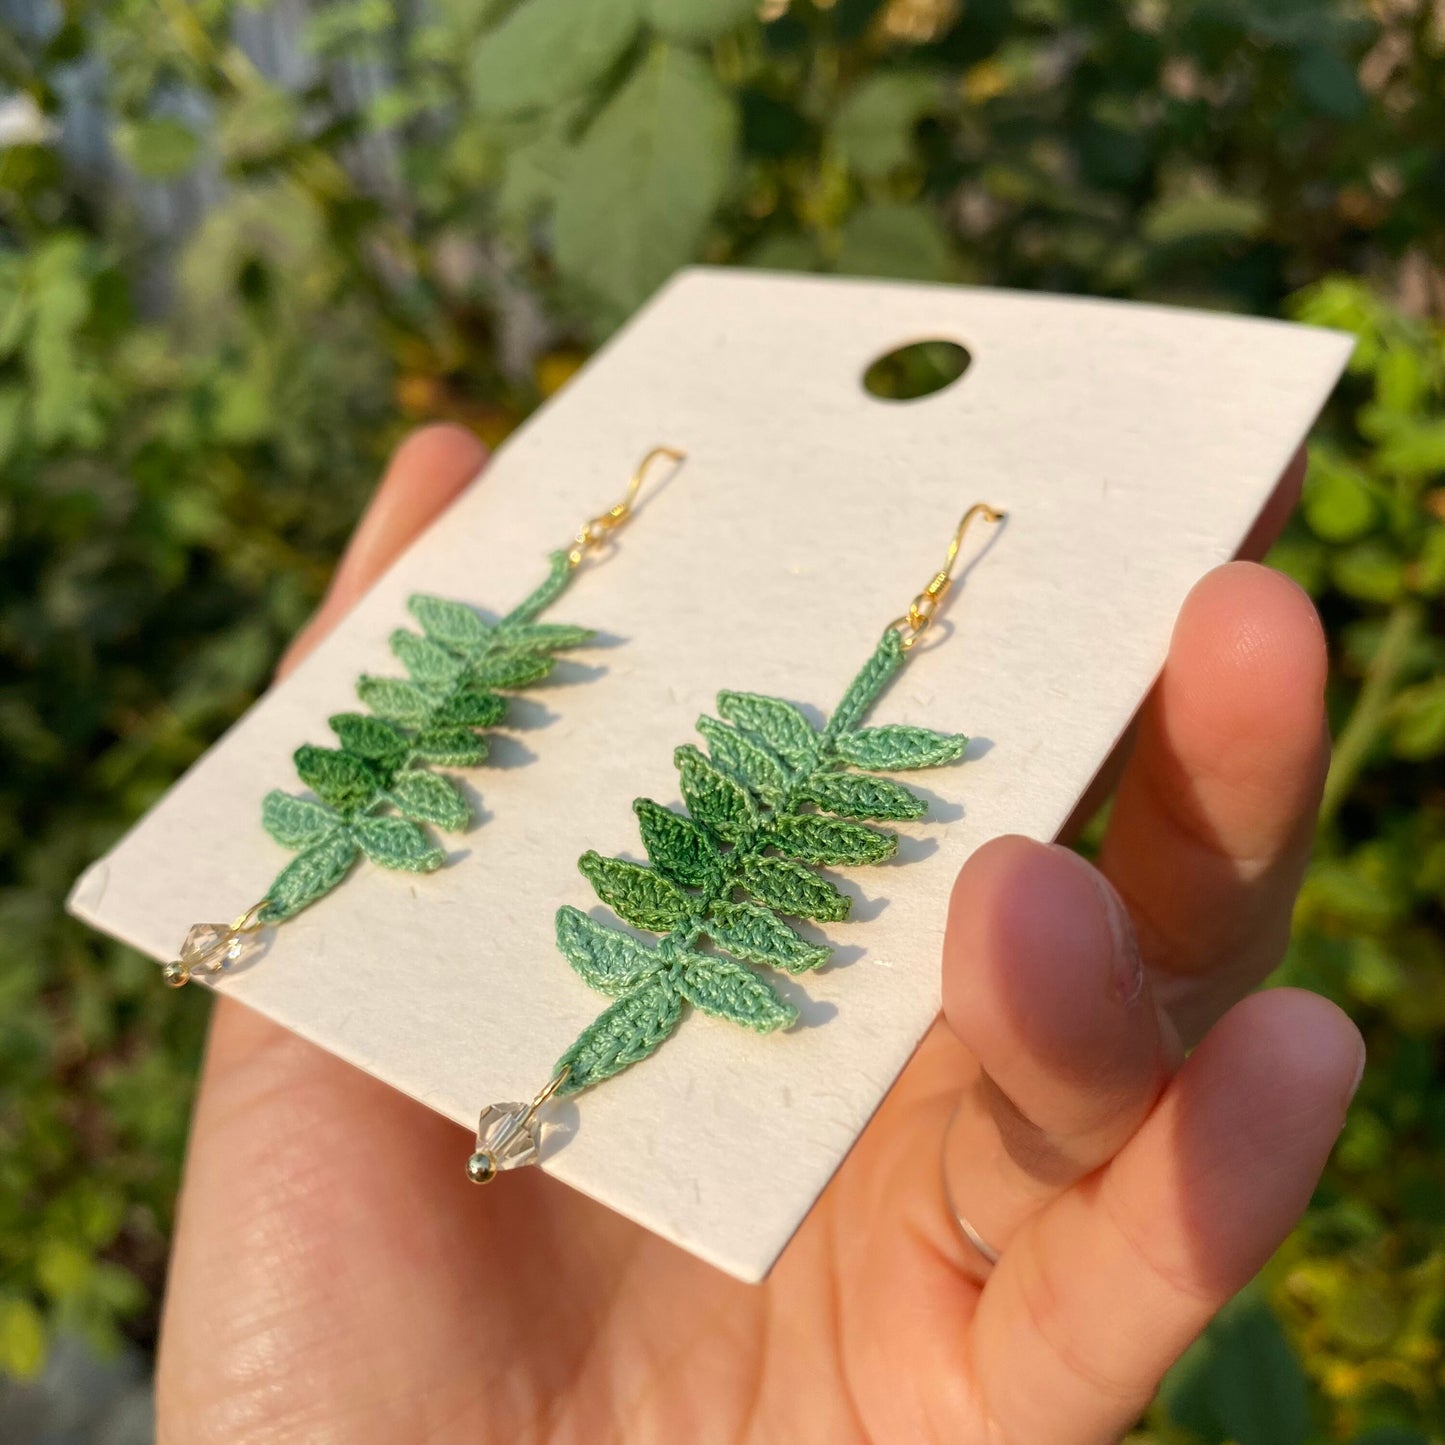 Load image into Gallery viewer, Green ombre fern leaf crochet handmade dangle earrings/microcrochet/Knitted jewelry/Forest style/Indoor plant/Polypodiophyta/Instagram
